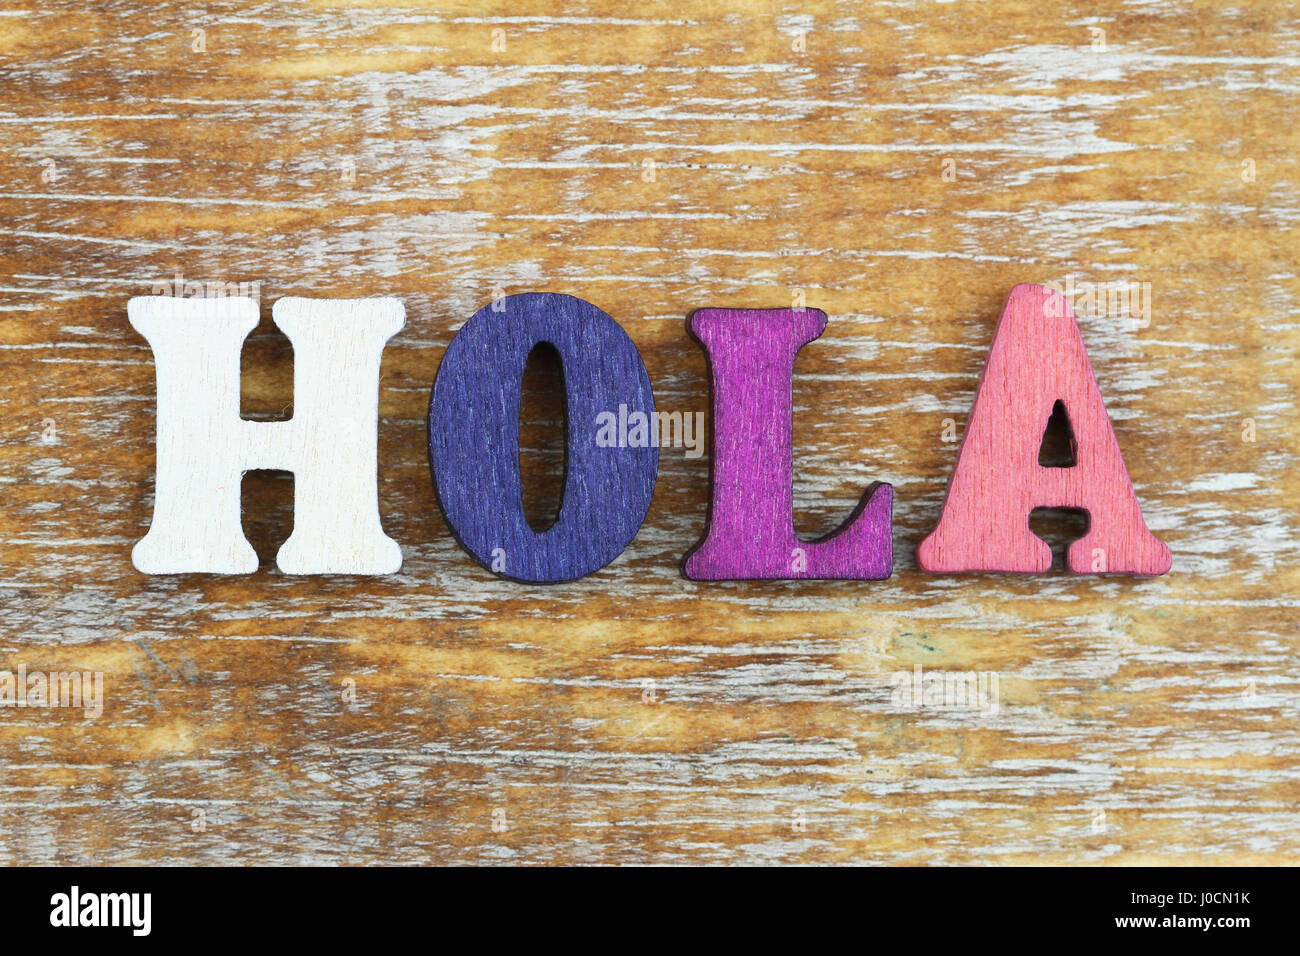 Word hola (hello in Spanish) written with colorful letters on wooden  surface Stock Photo - Alamy